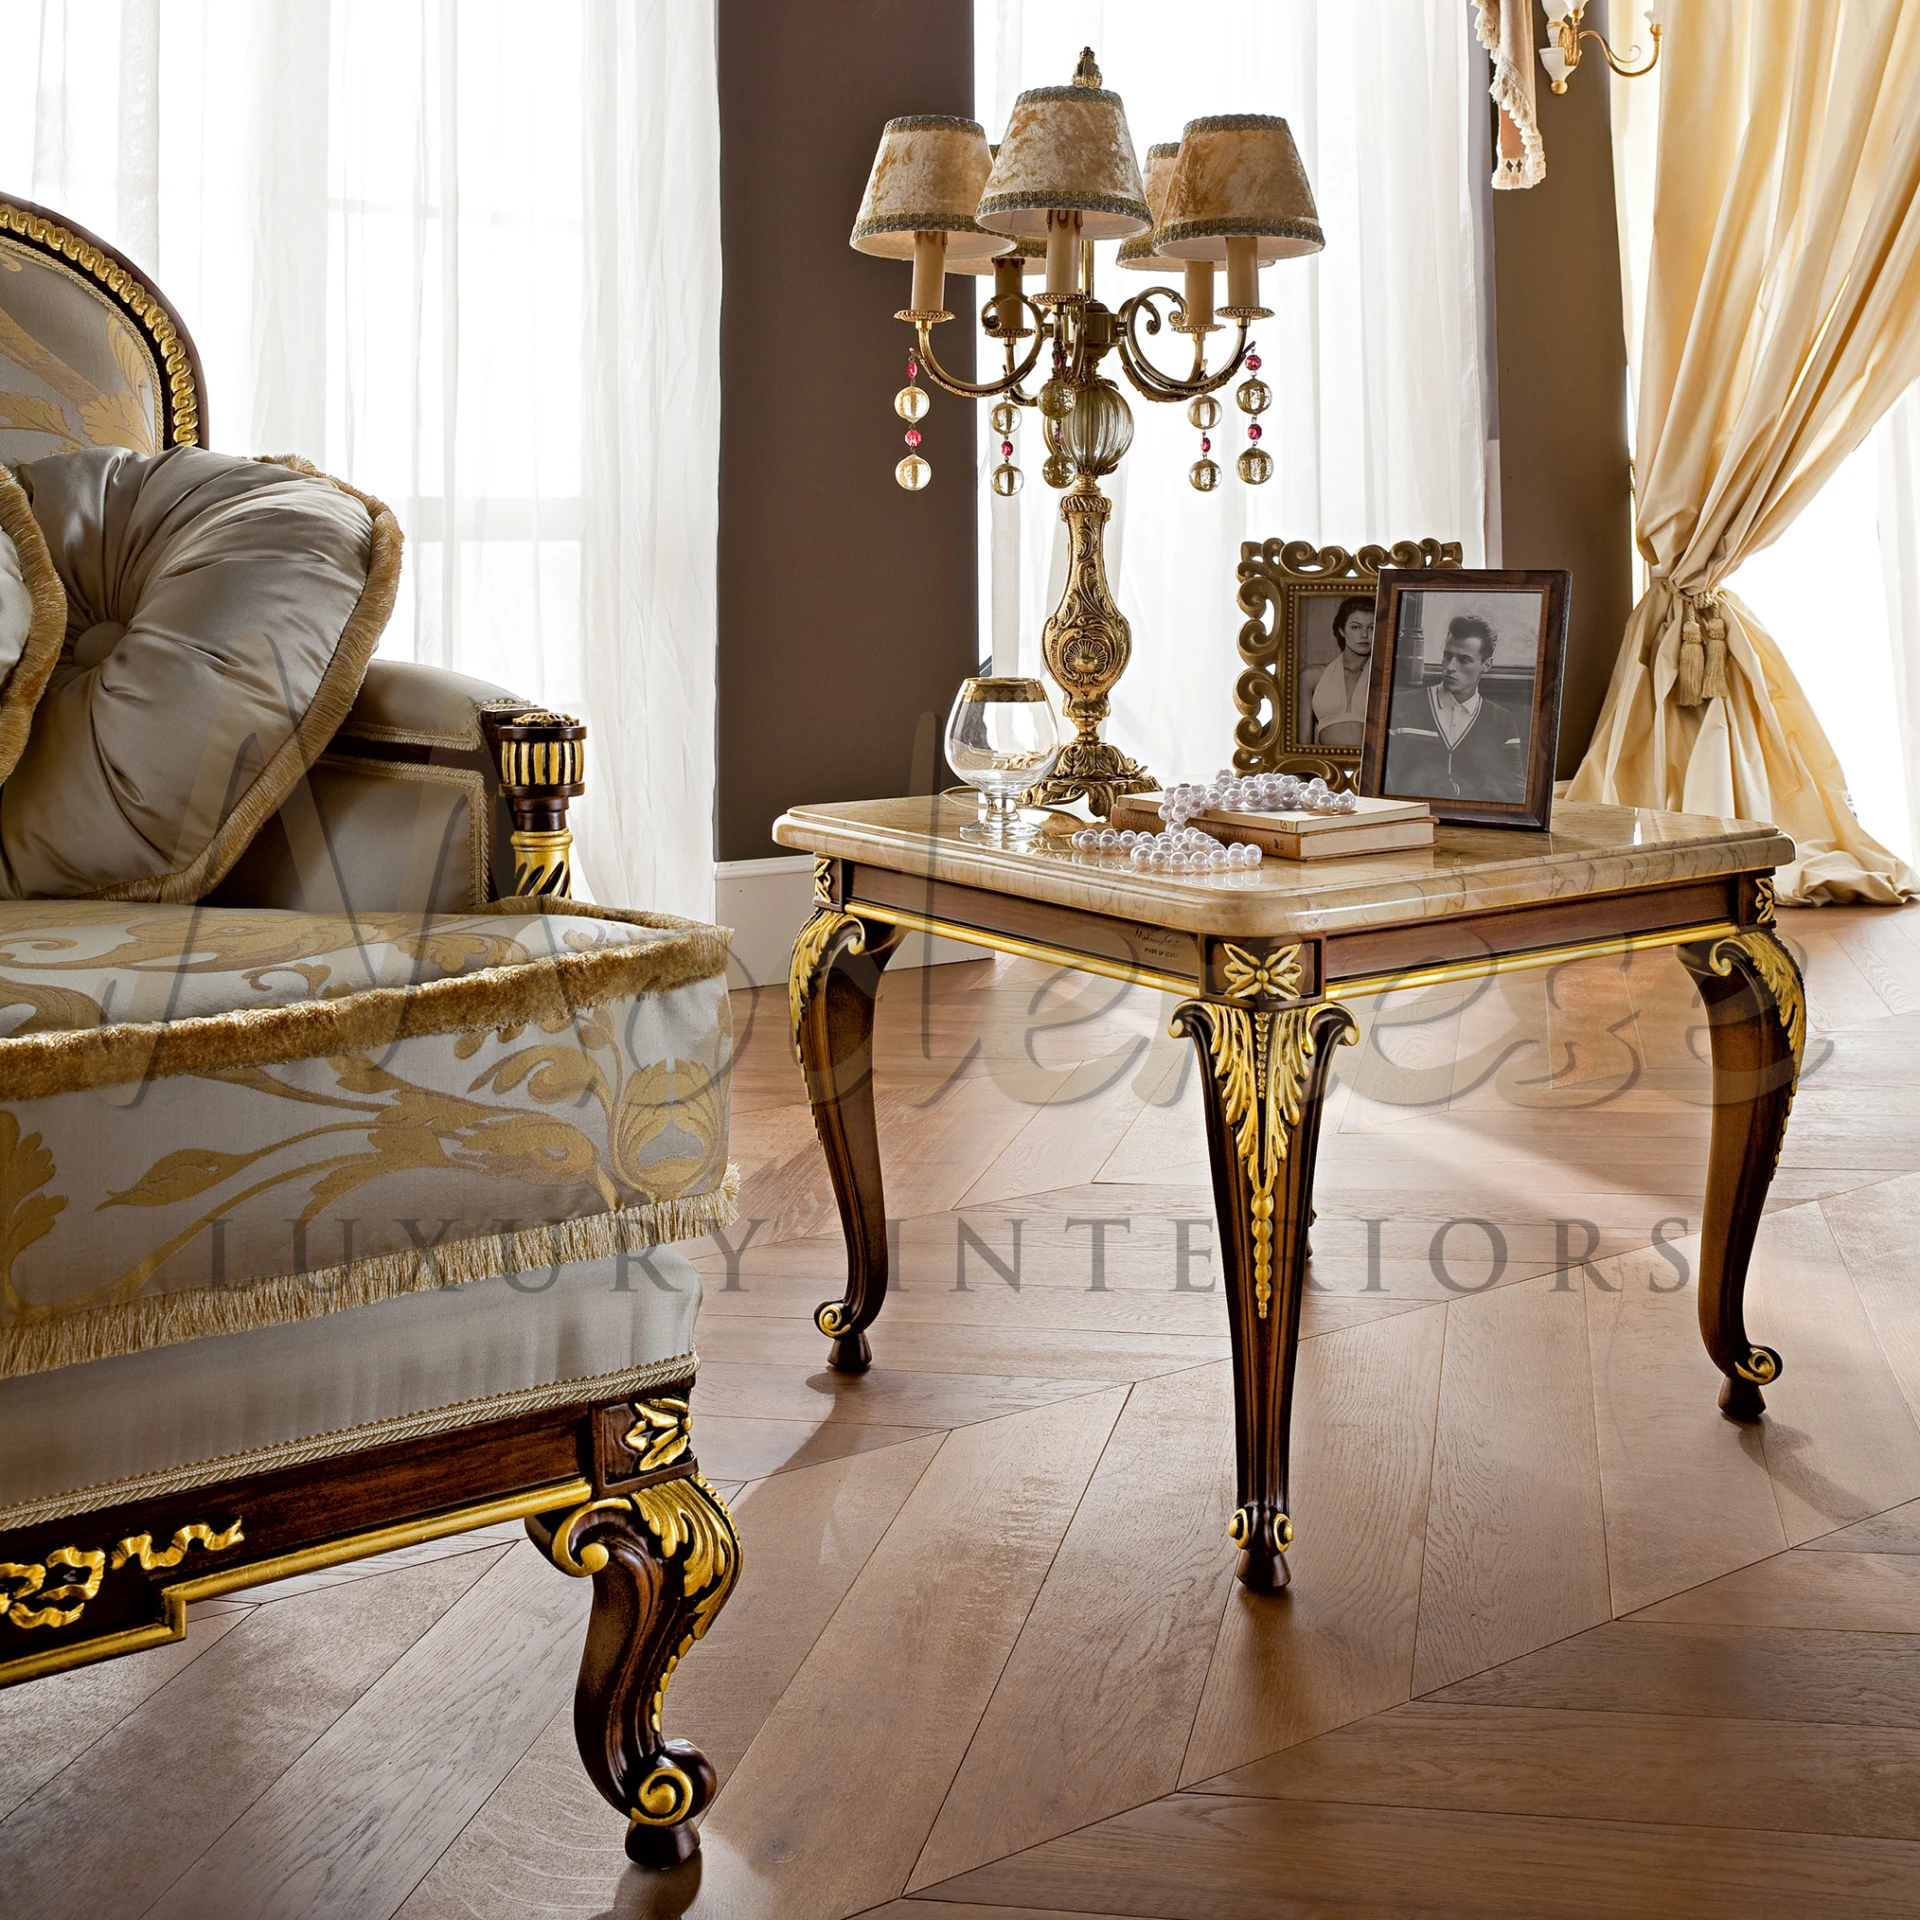 Opulent solid wood side table with gold leaf details and marble top, reflecting the pinnacle of luxury interior design in Baroque style.